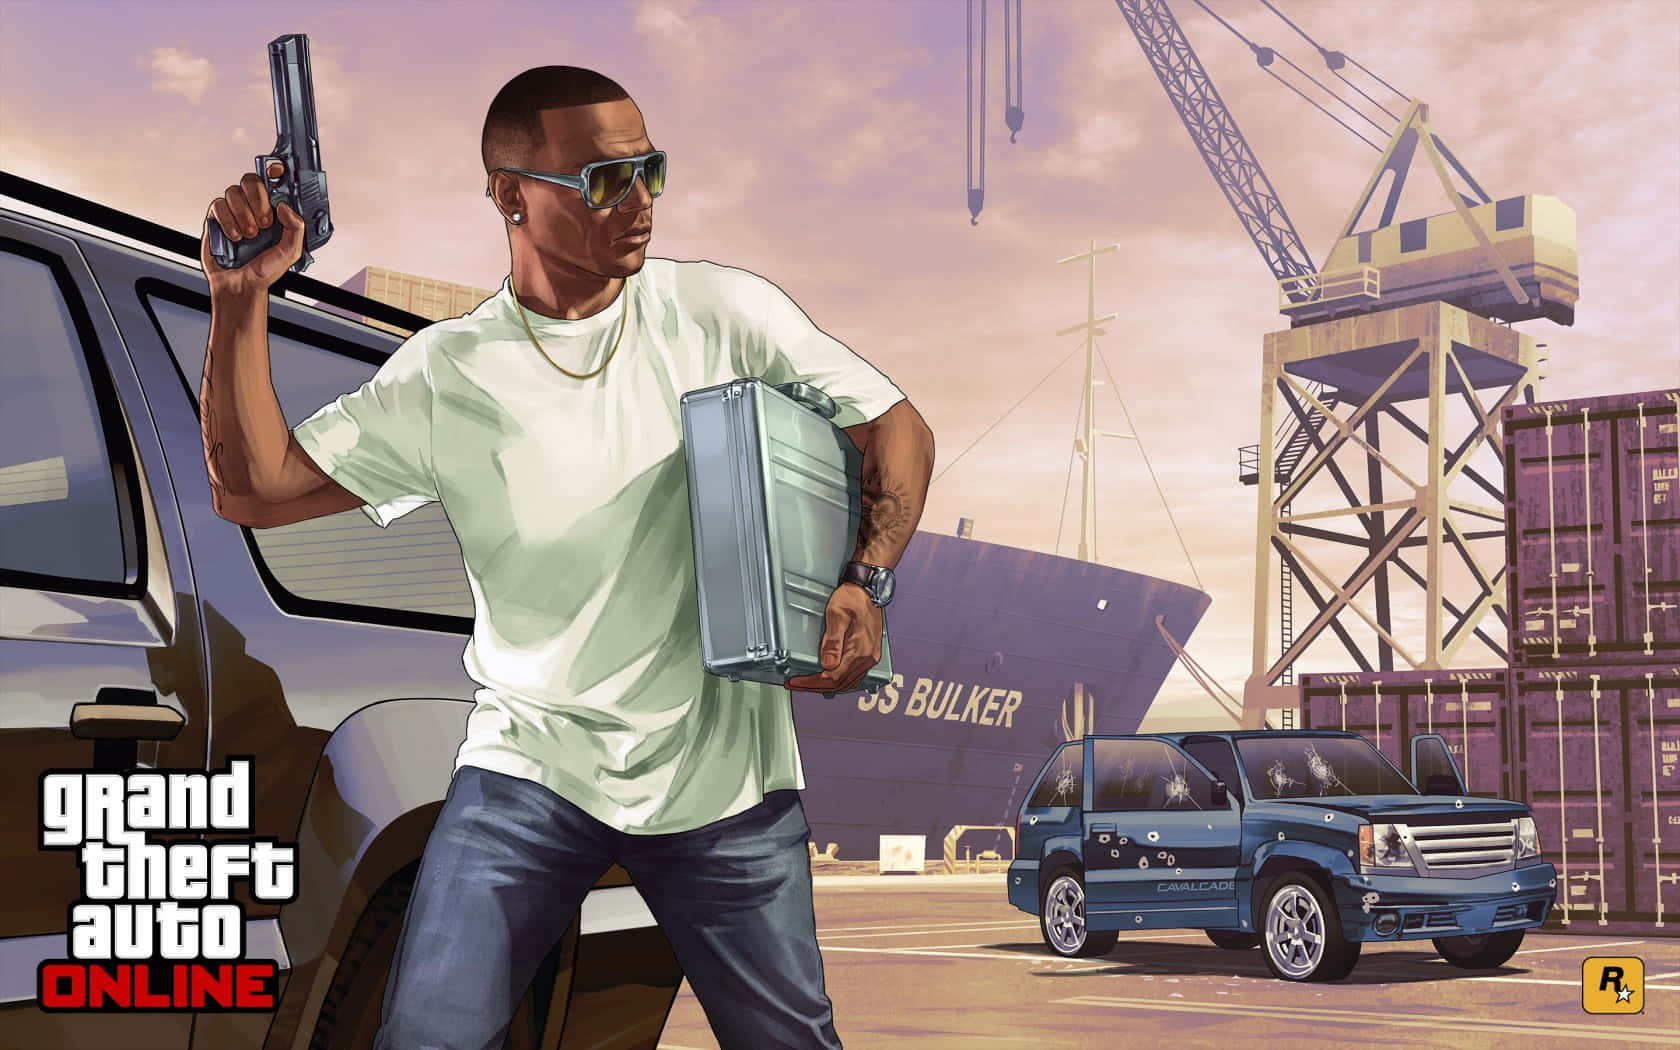 Explore the vast and dangerous world of Grand Theft Auto Online. Wallpaper